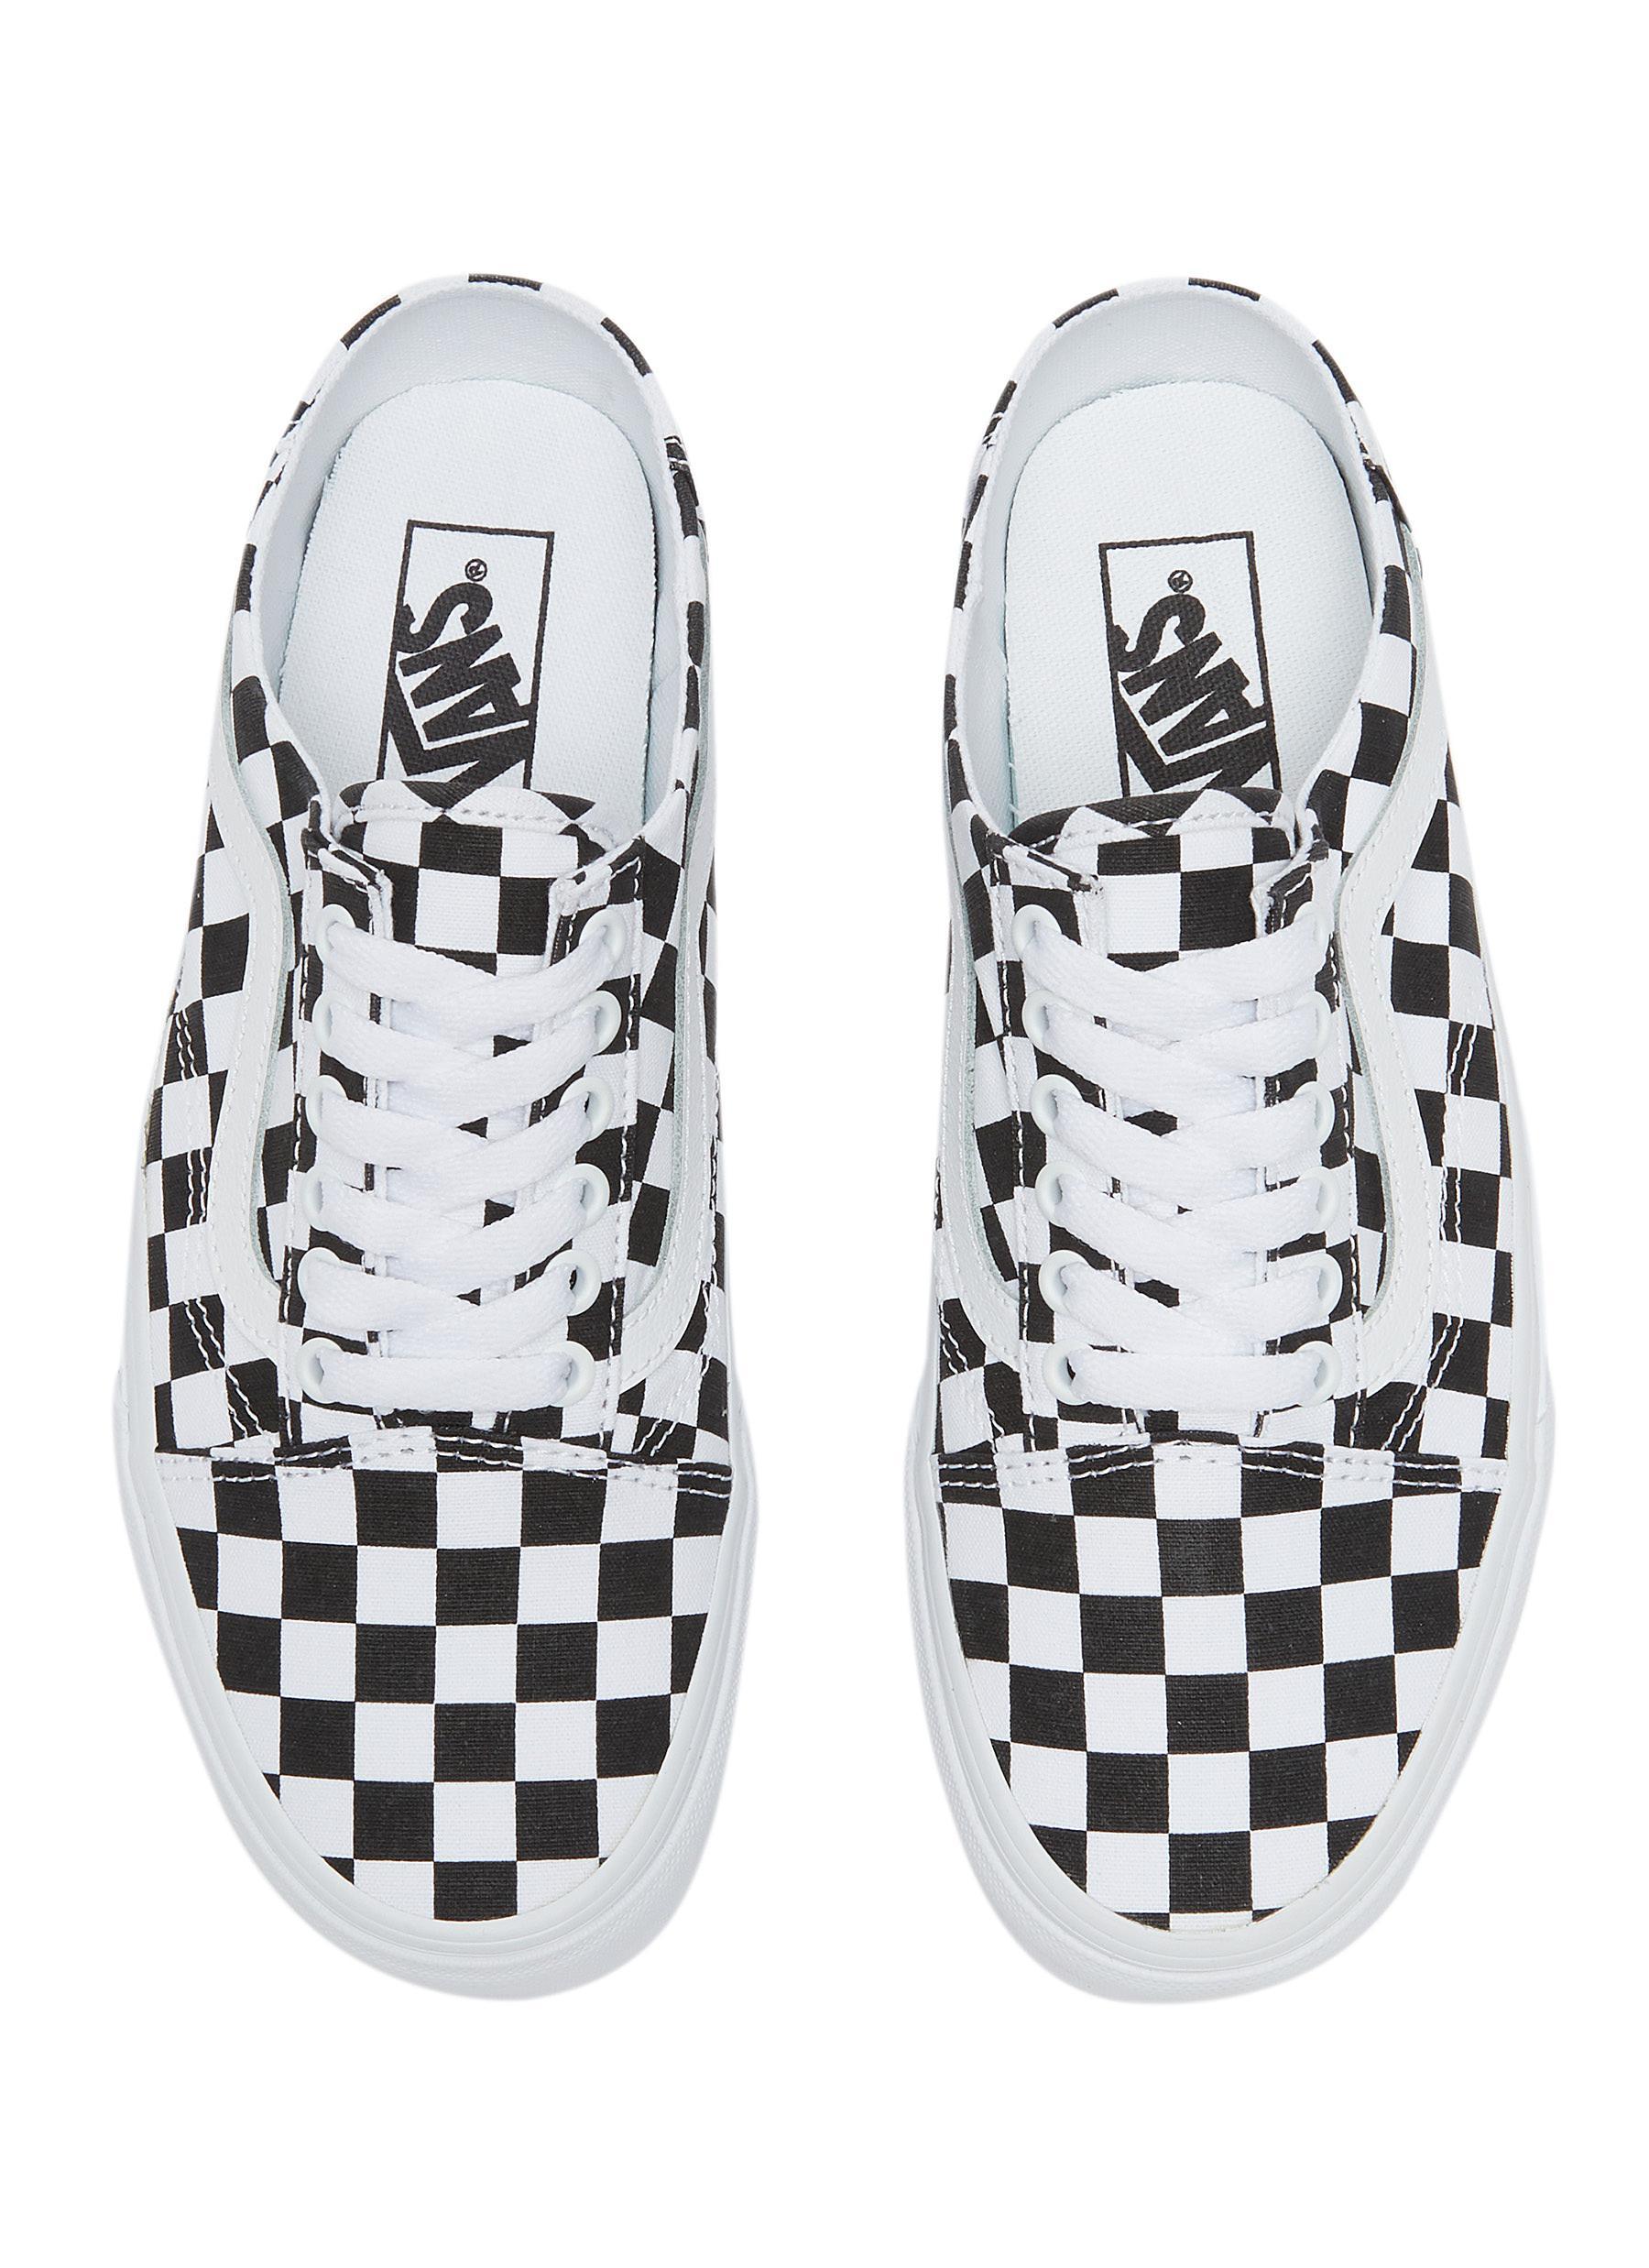 Vans Old Checkered Slip-on Mules Women Shoes Sneakers Low-top Old Skool' Checkered Slip-on Mules in | Lyst